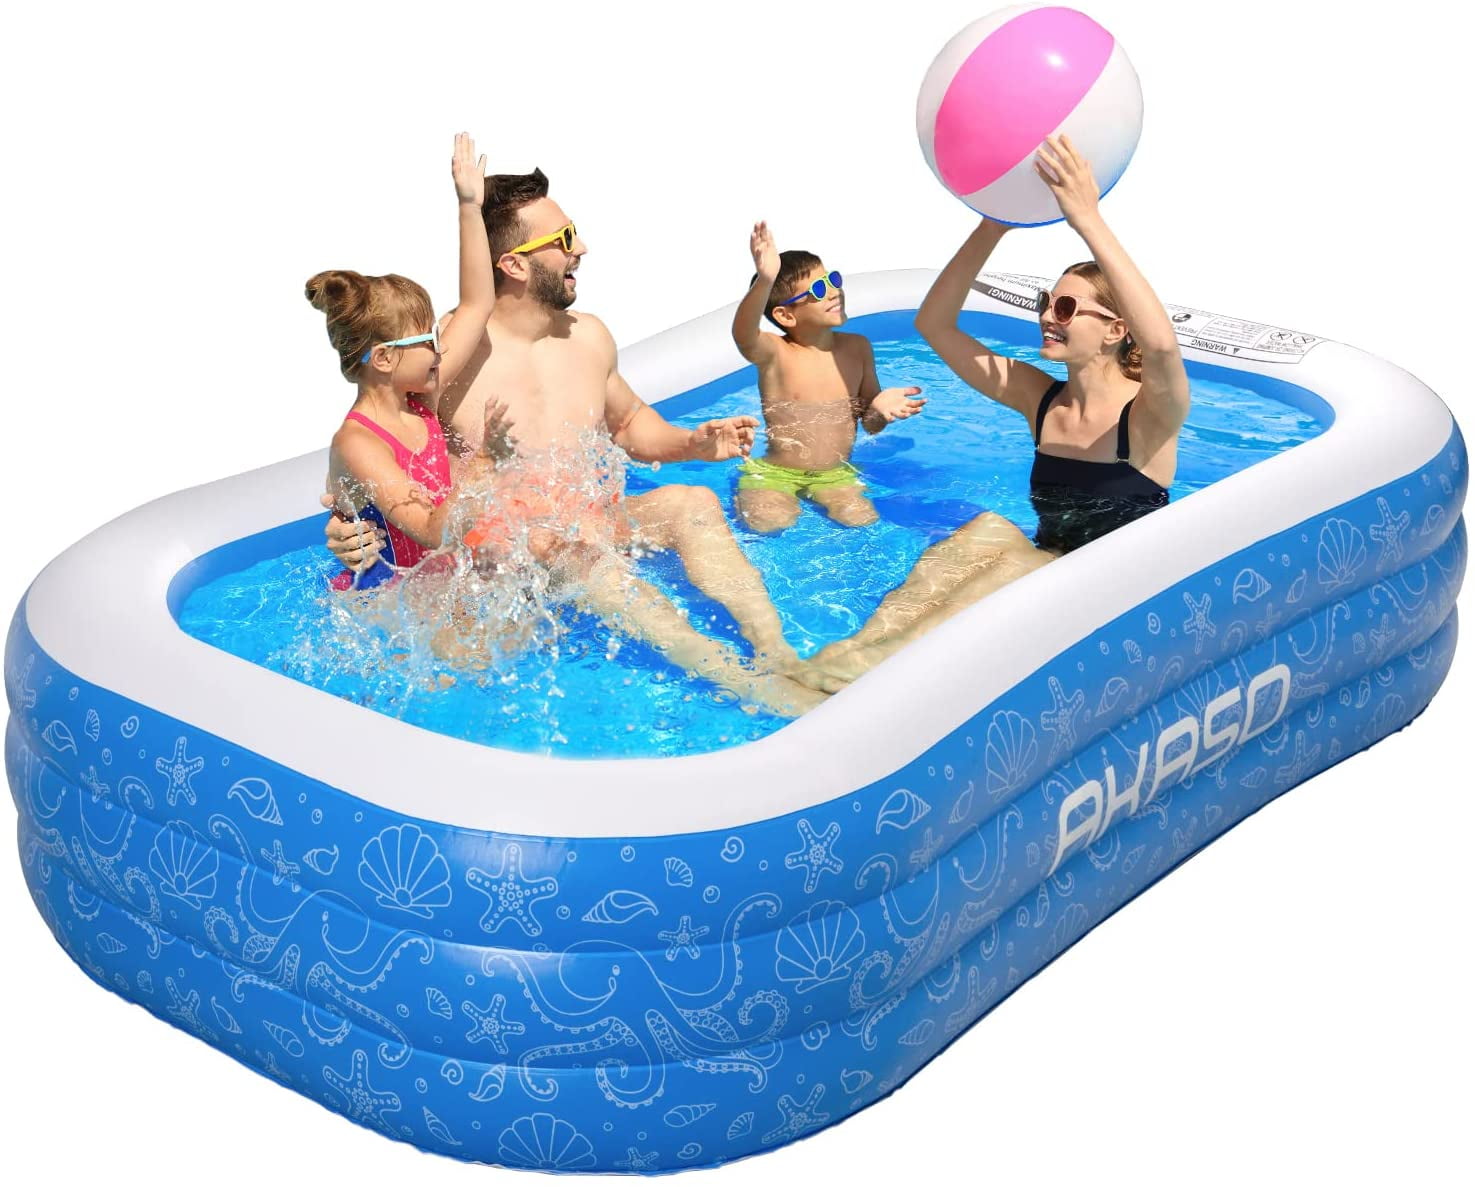 Sable Inflatable Pool, Rectangular Swimming Pools for Kids, Adult 